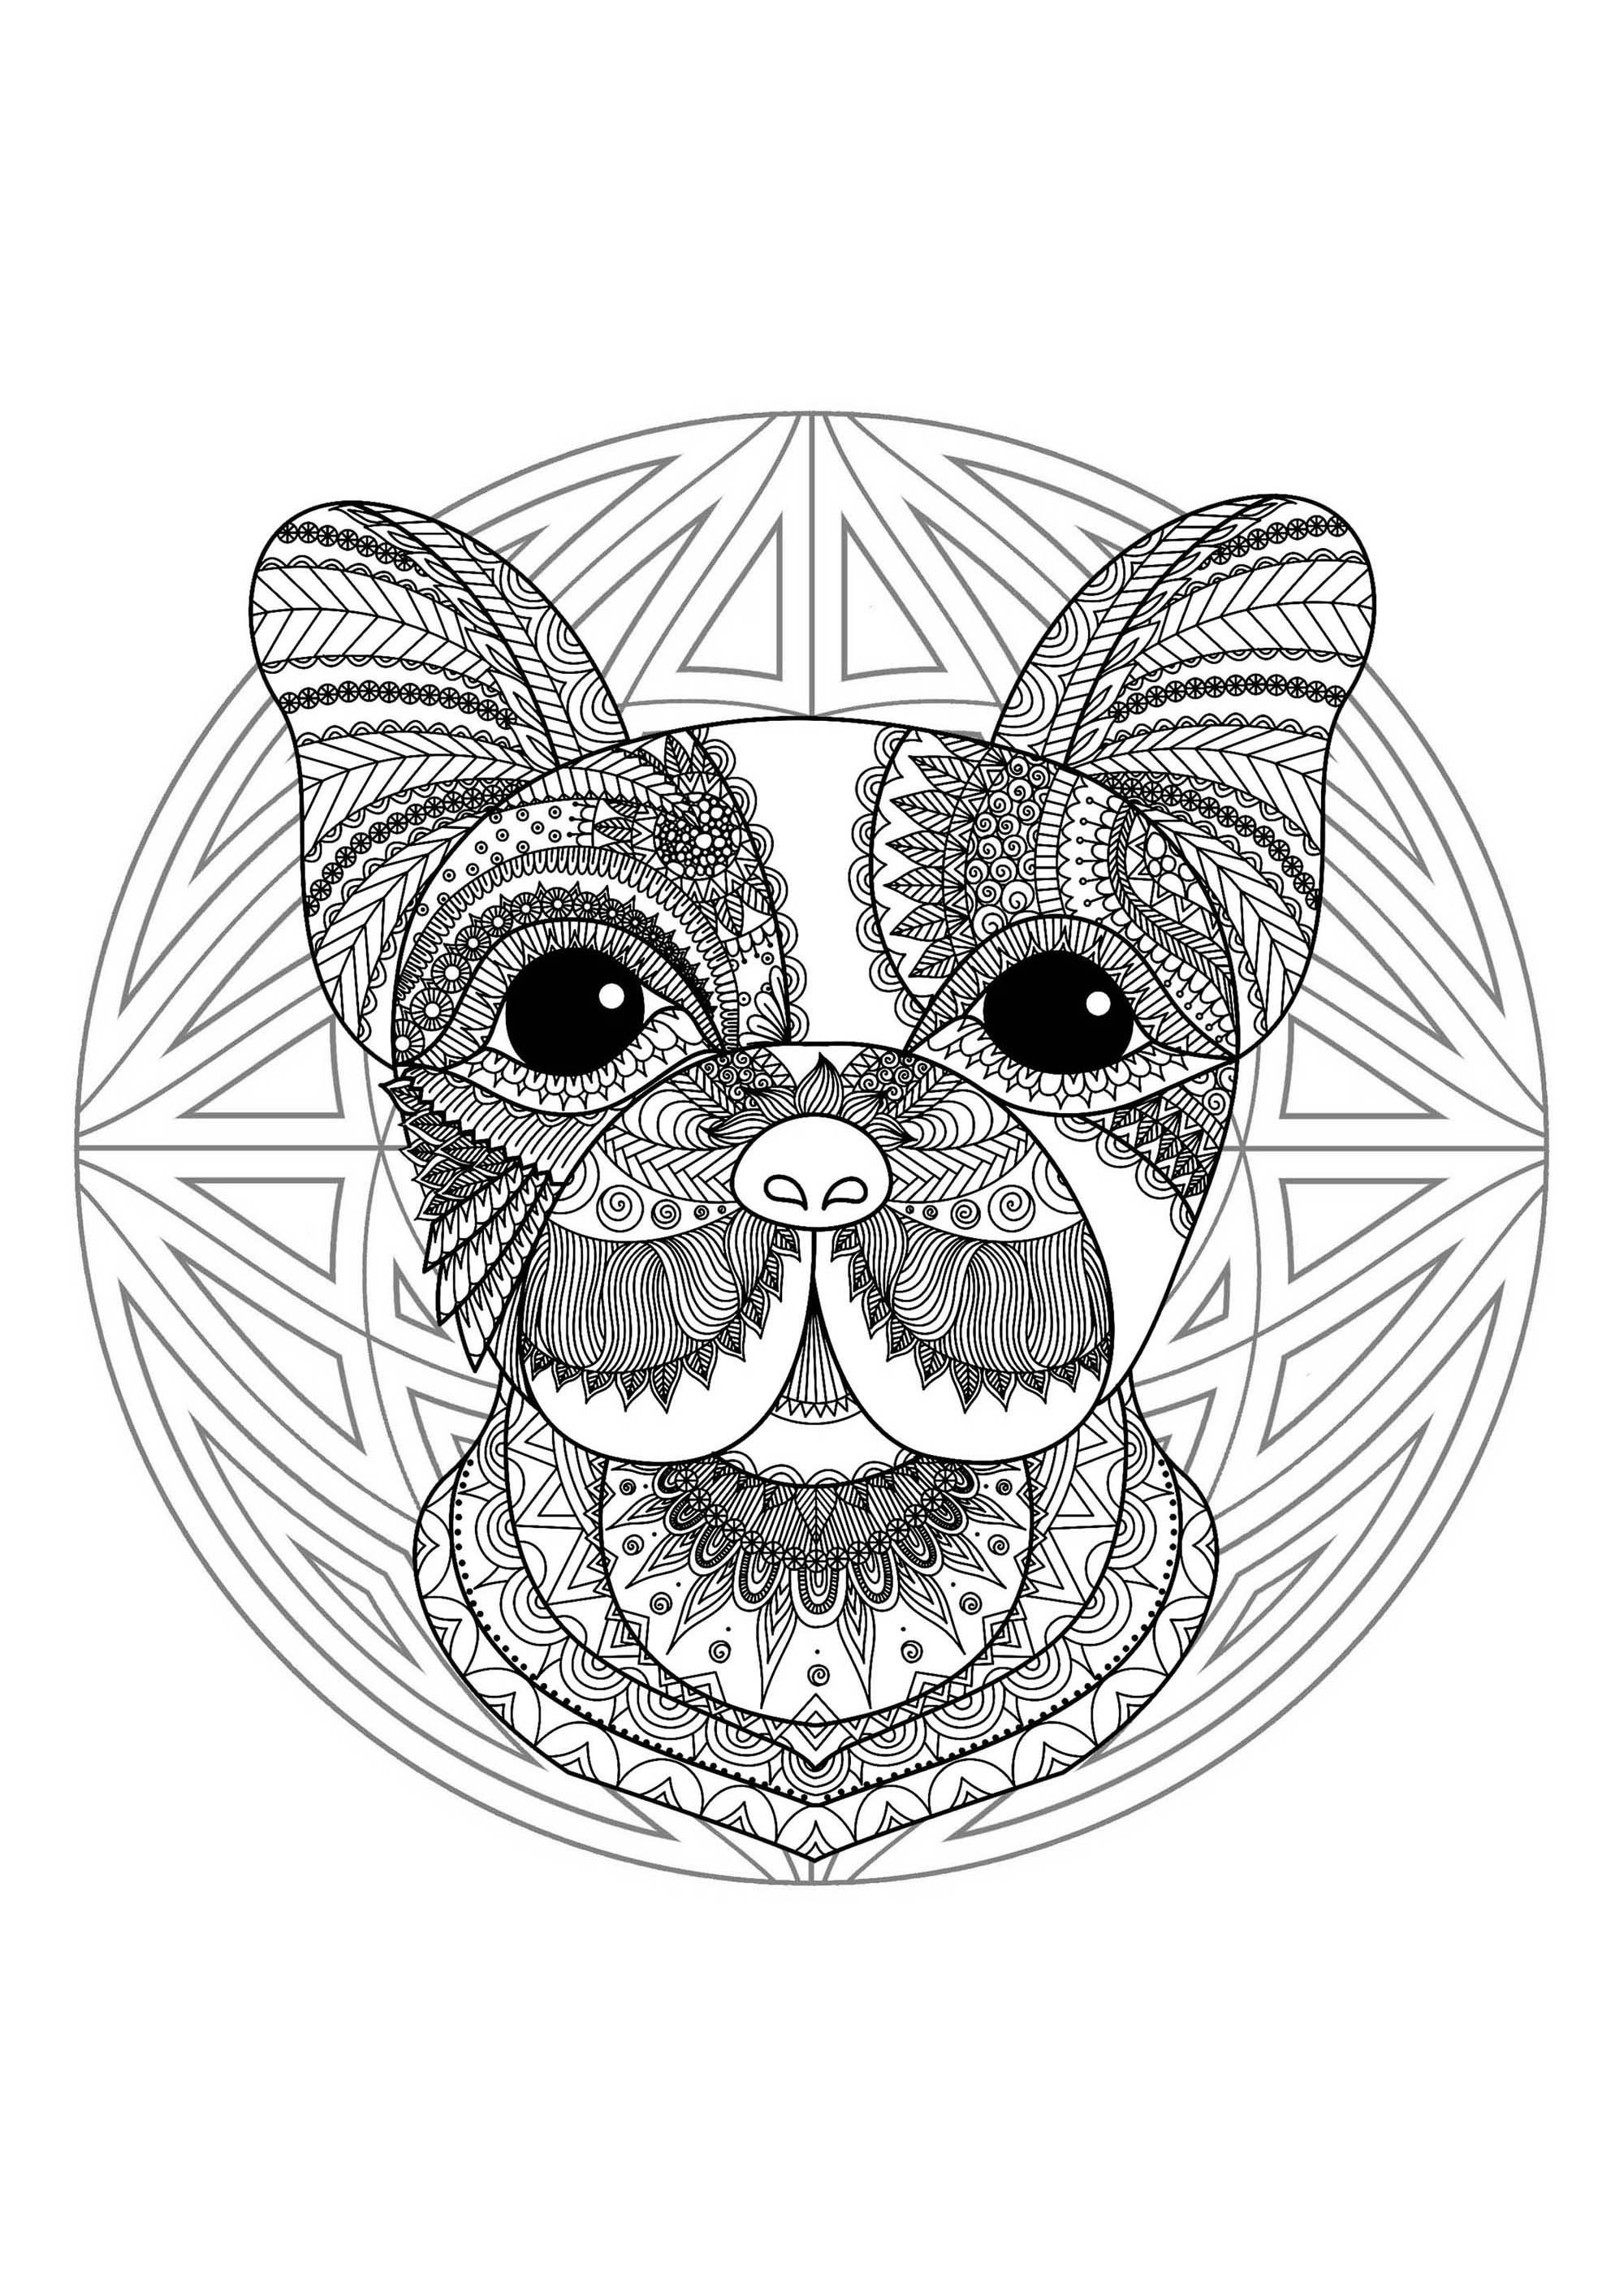 Dog head in a difficult Mandala. A Mandala quite difficult to color, perfect if you like to color small areas, and if you like various details.